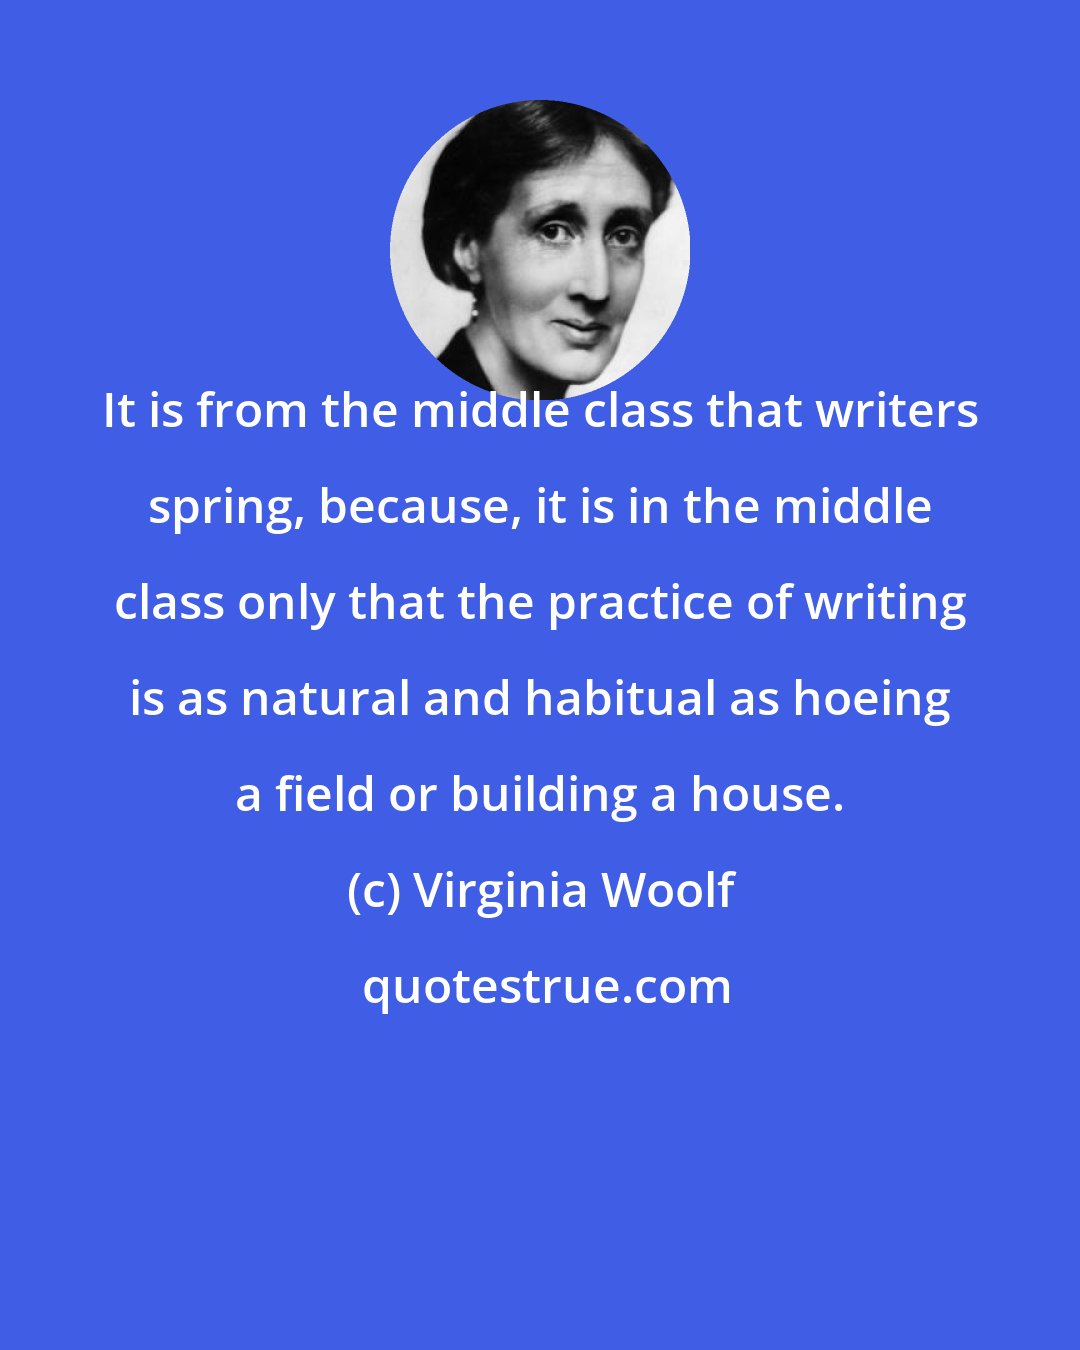 Virginia Woolf: It is from the middle class that writers spring, because, it is in the middle class only that the practice of writing is as natural and habitual as hoeing a field or building a house.